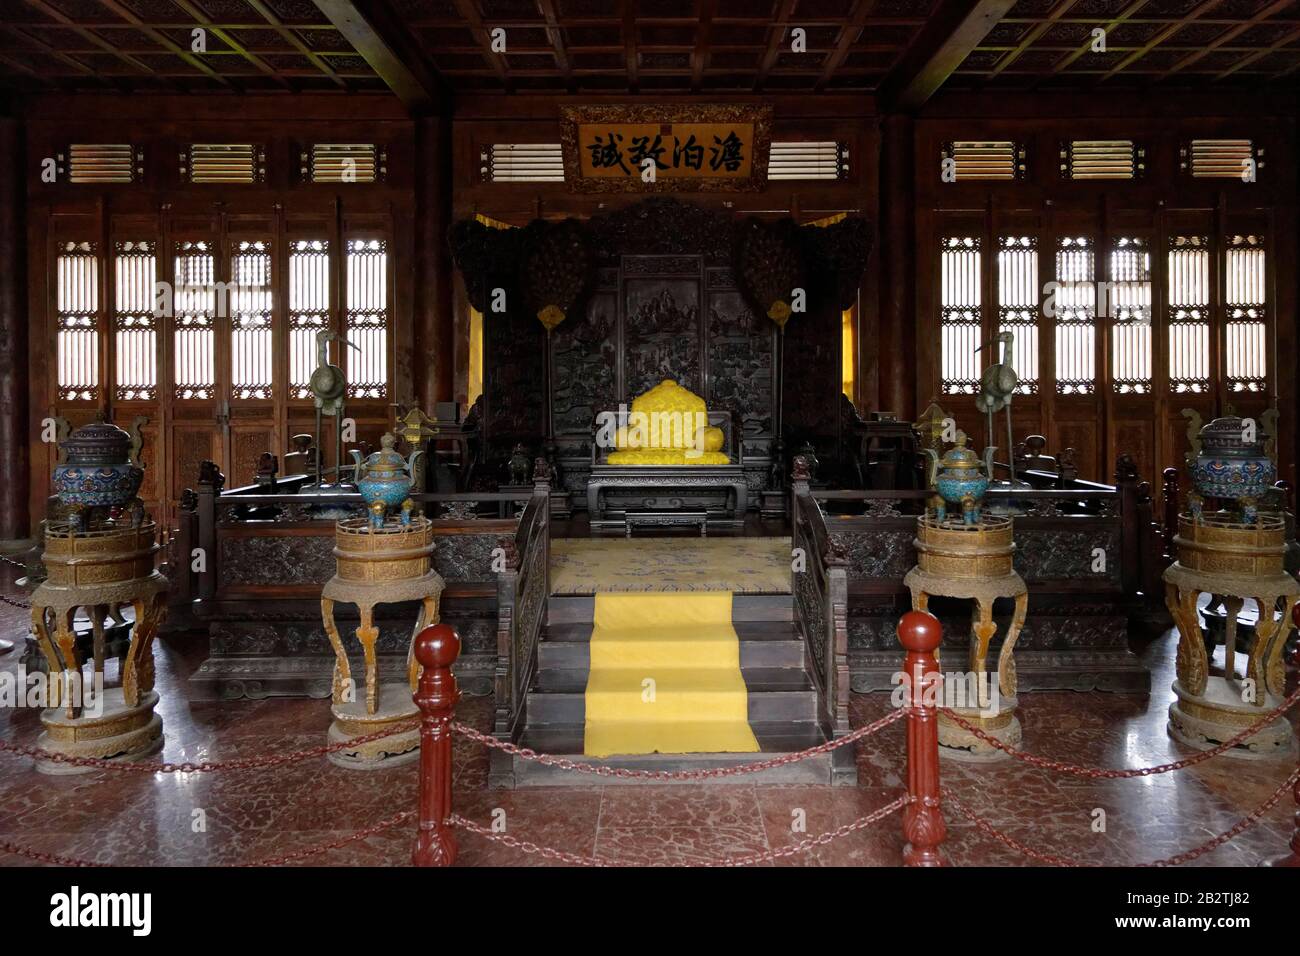 Imperial summer residence, hall of unpretentiousness and seriousness, throne, Bishu Shanzhuang, Chengde, Hebei Sheng, China Stock Photo